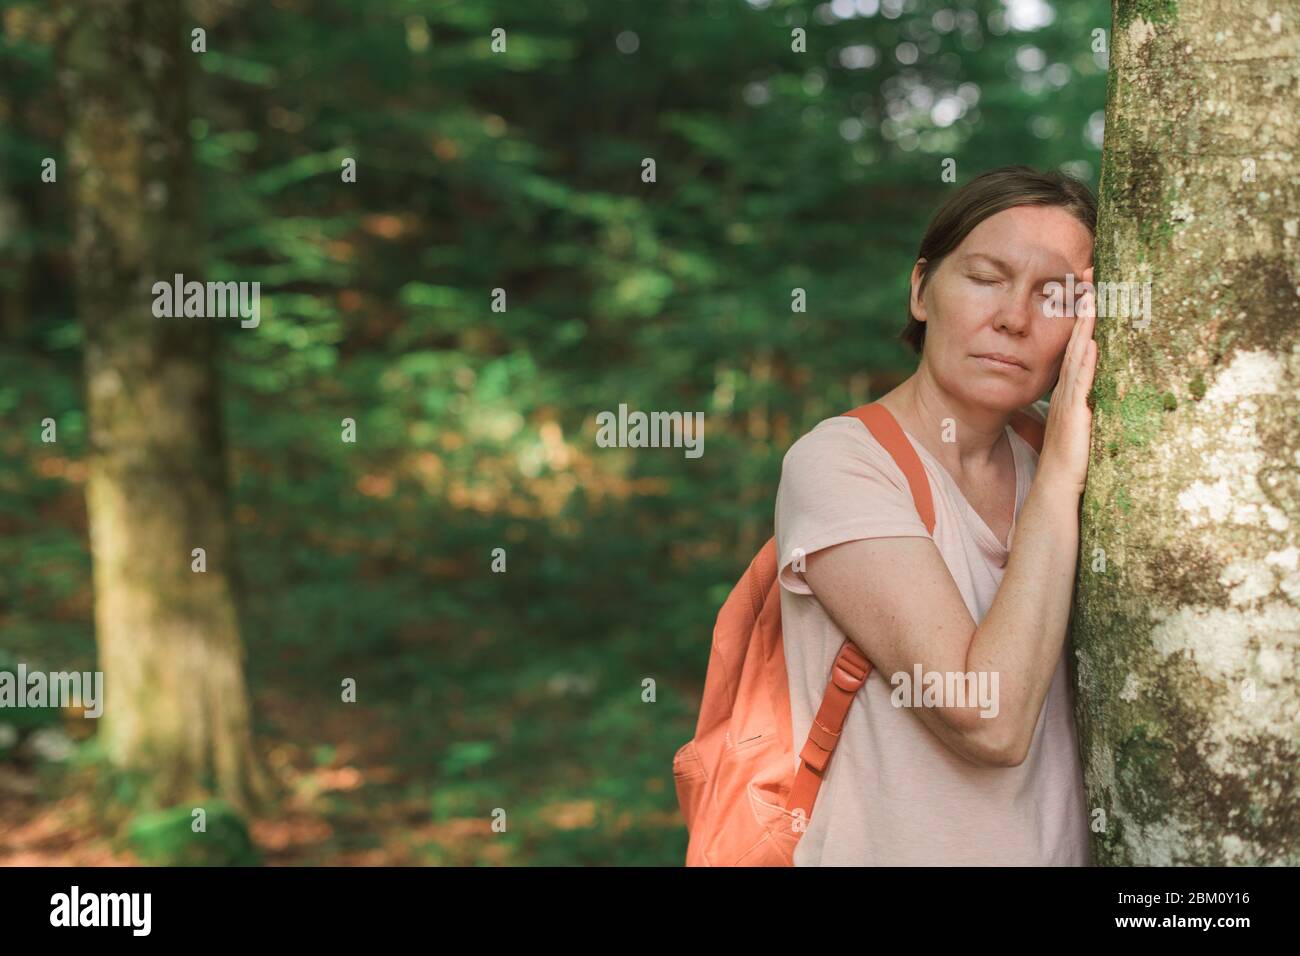 Female environmentalist leaning on tree trunk in forest, selective focus Stock Photo